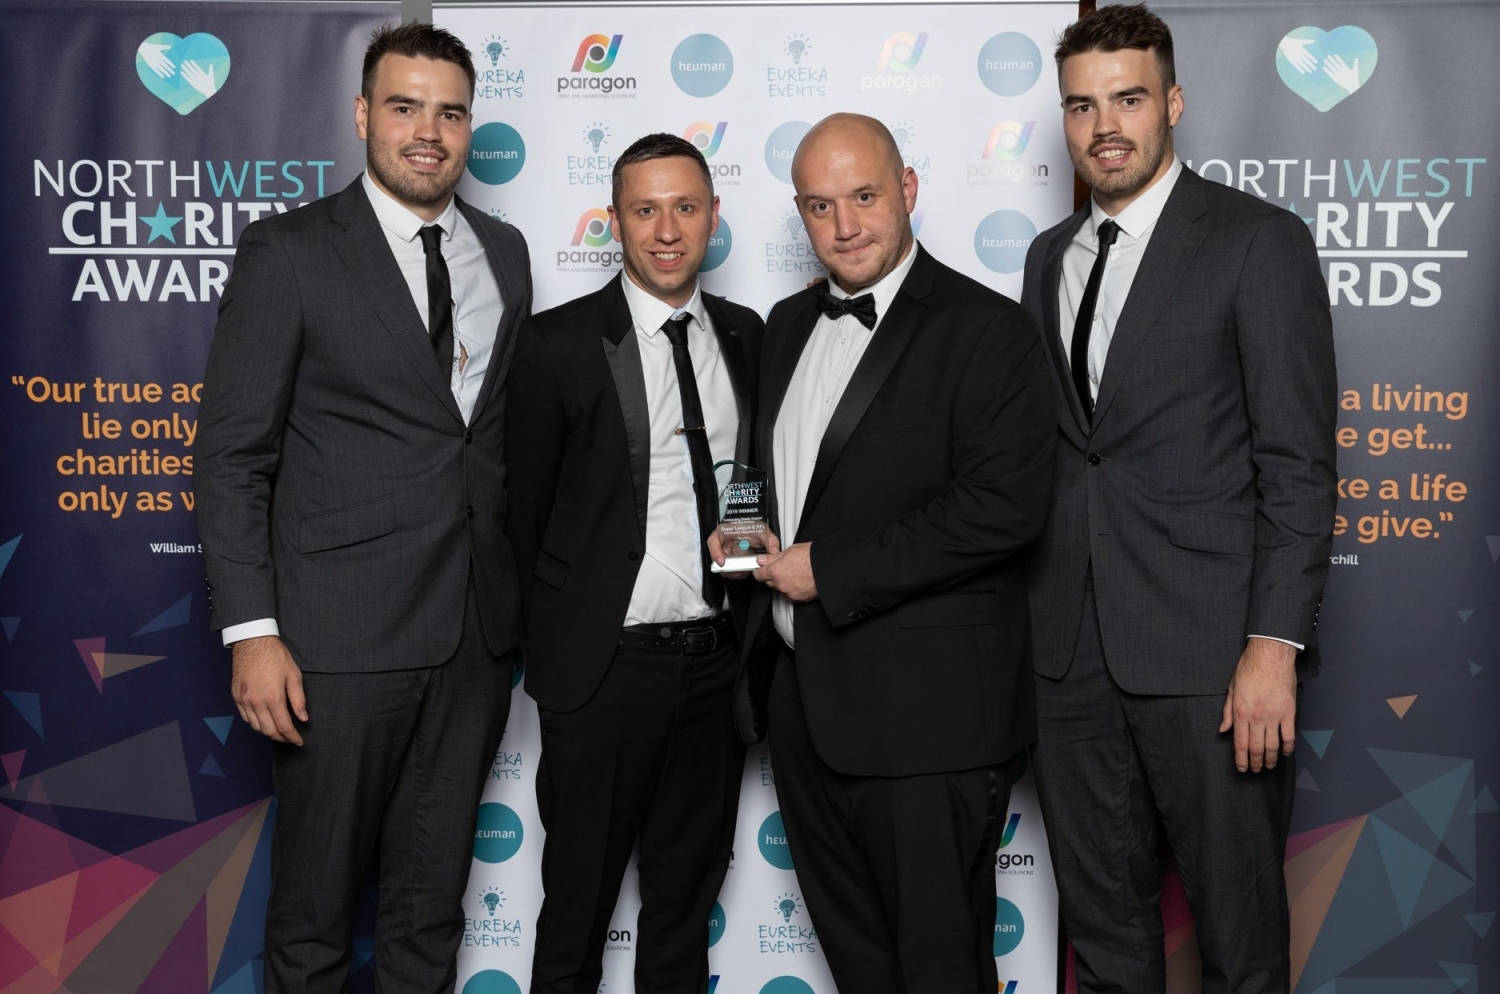 Recognition for Rugby League at prestigious charity awards